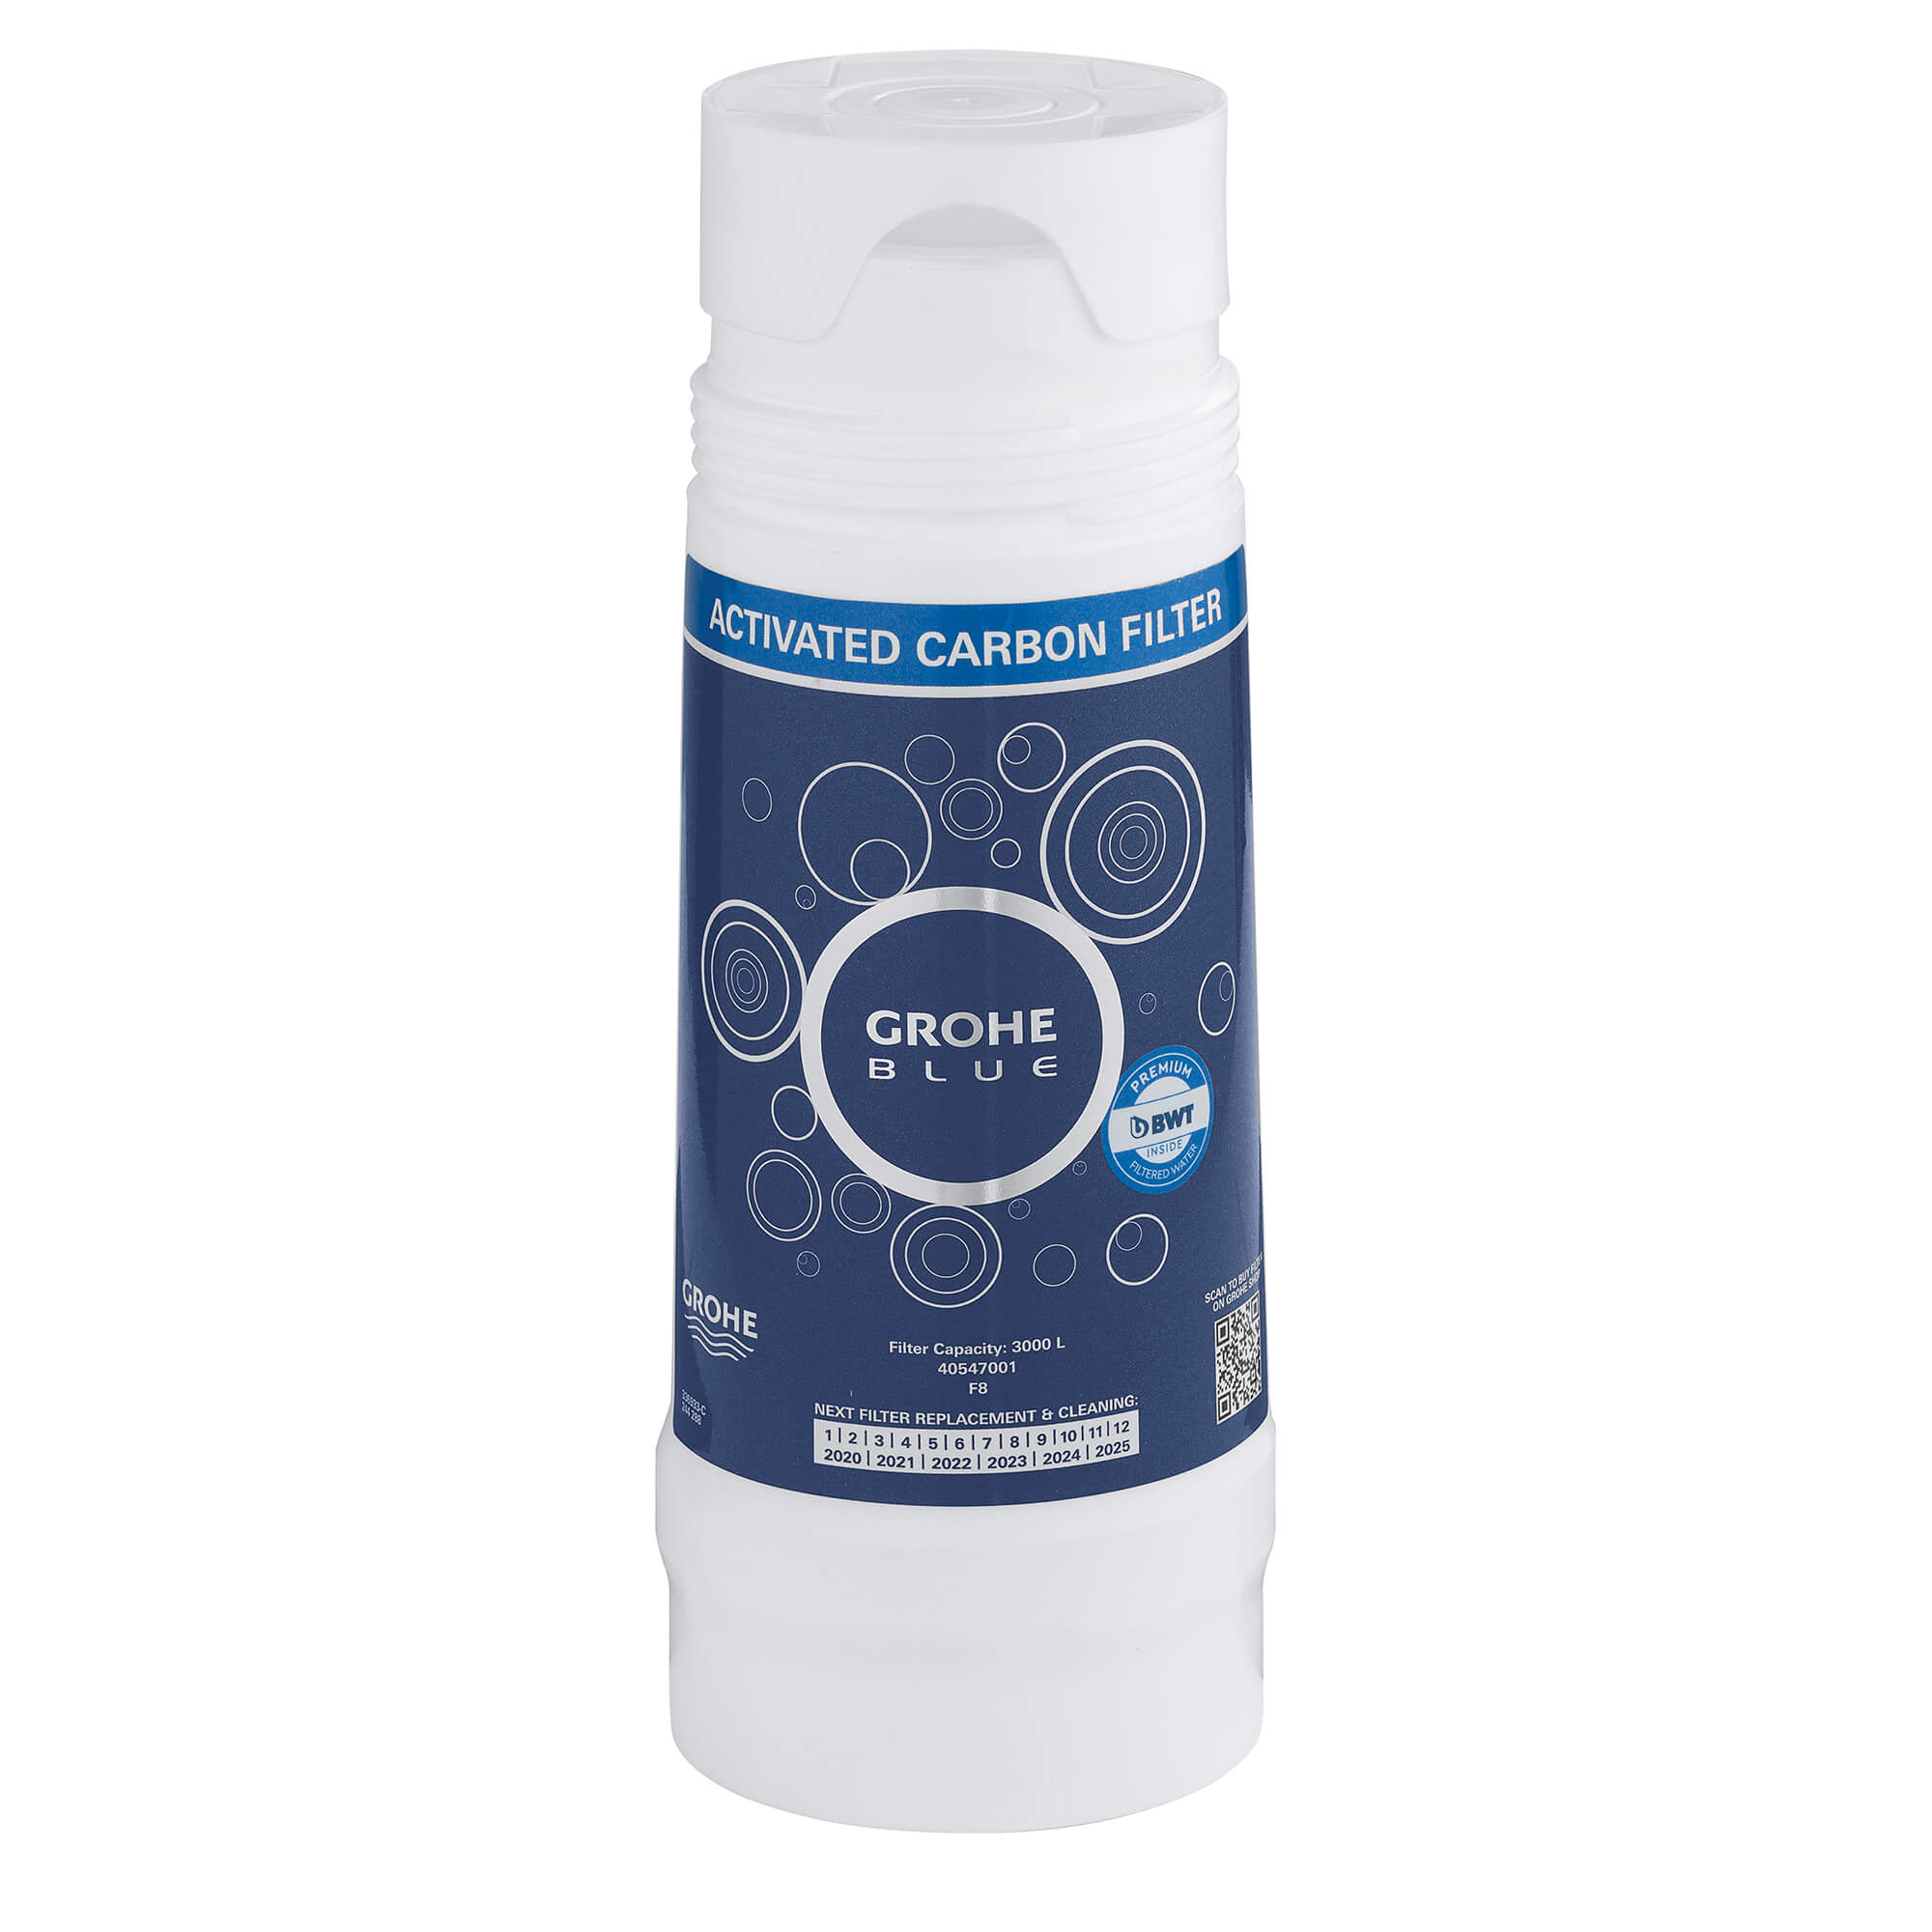 GROHE Blue Carbon Filter GROHE NO FINISH